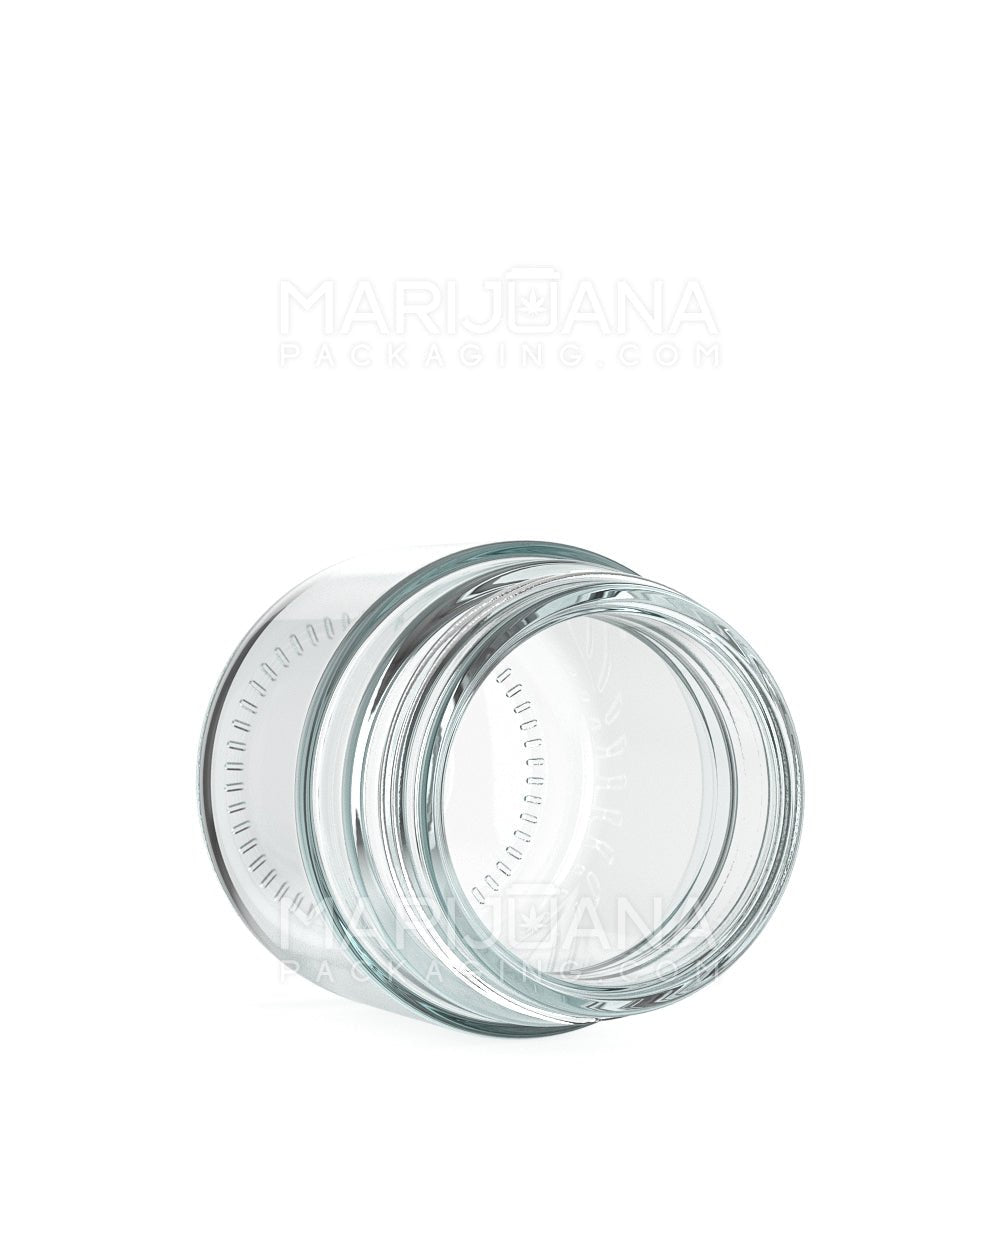 Child Resistant | Rounded Base Clear Glass Jars w/ Smooth Black Dome Cap | 55mm - 2oz - 200 Count - 4